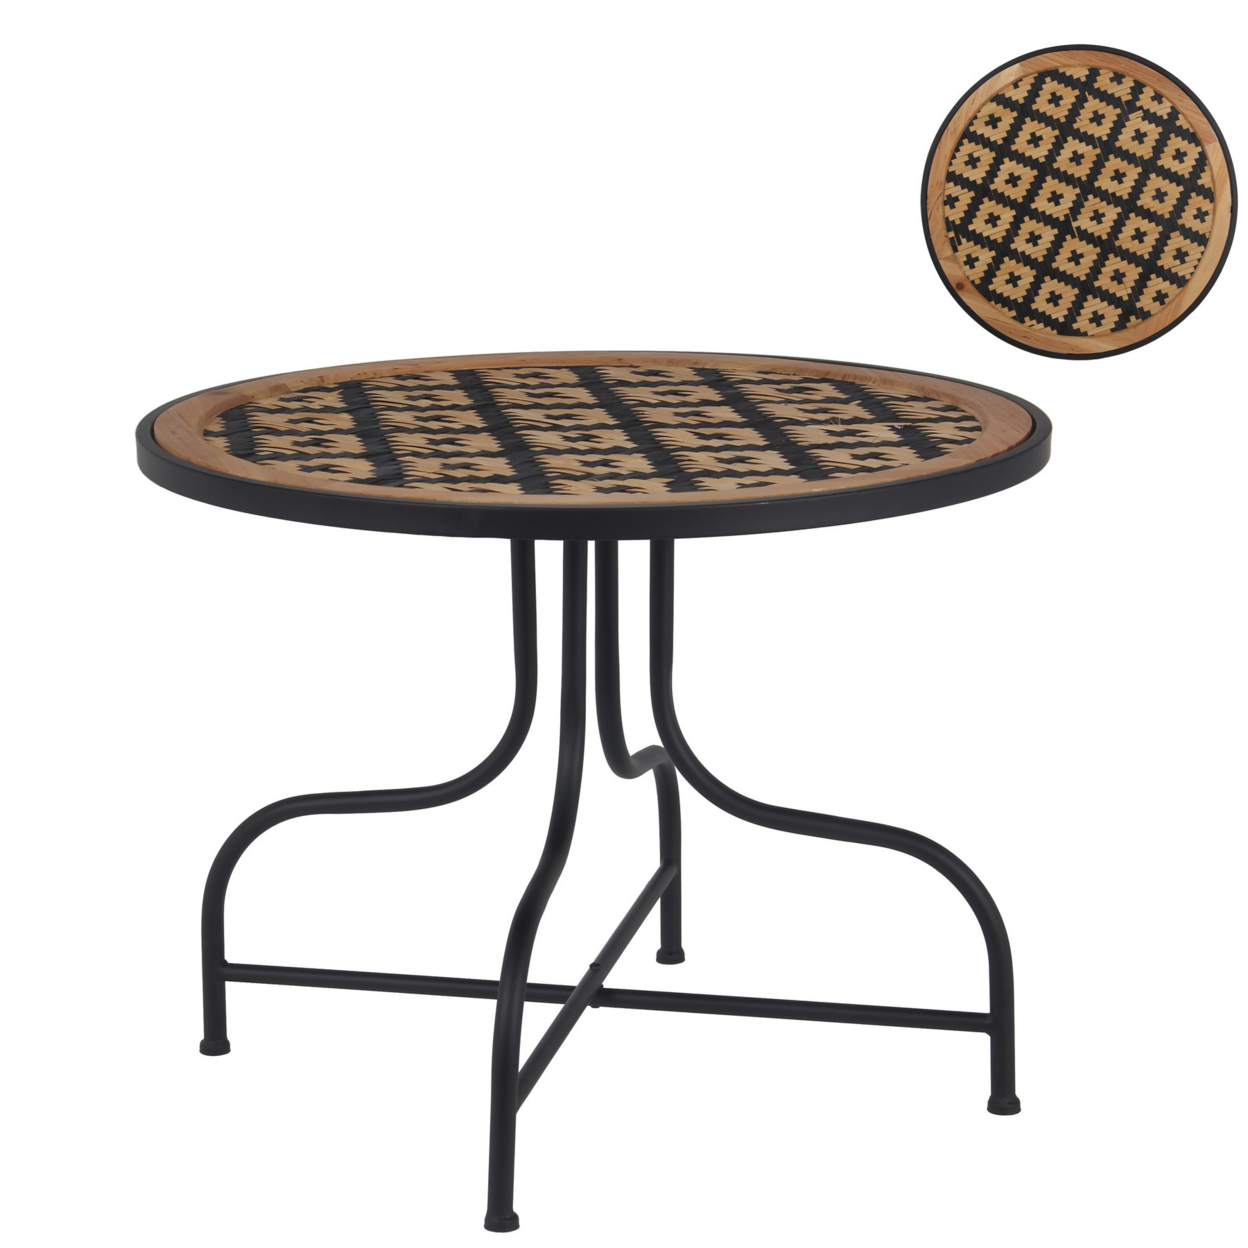 24 Inch Round Top Accent Table With Vinyl Weaving, Brown And Black- Saltoro Sherpi